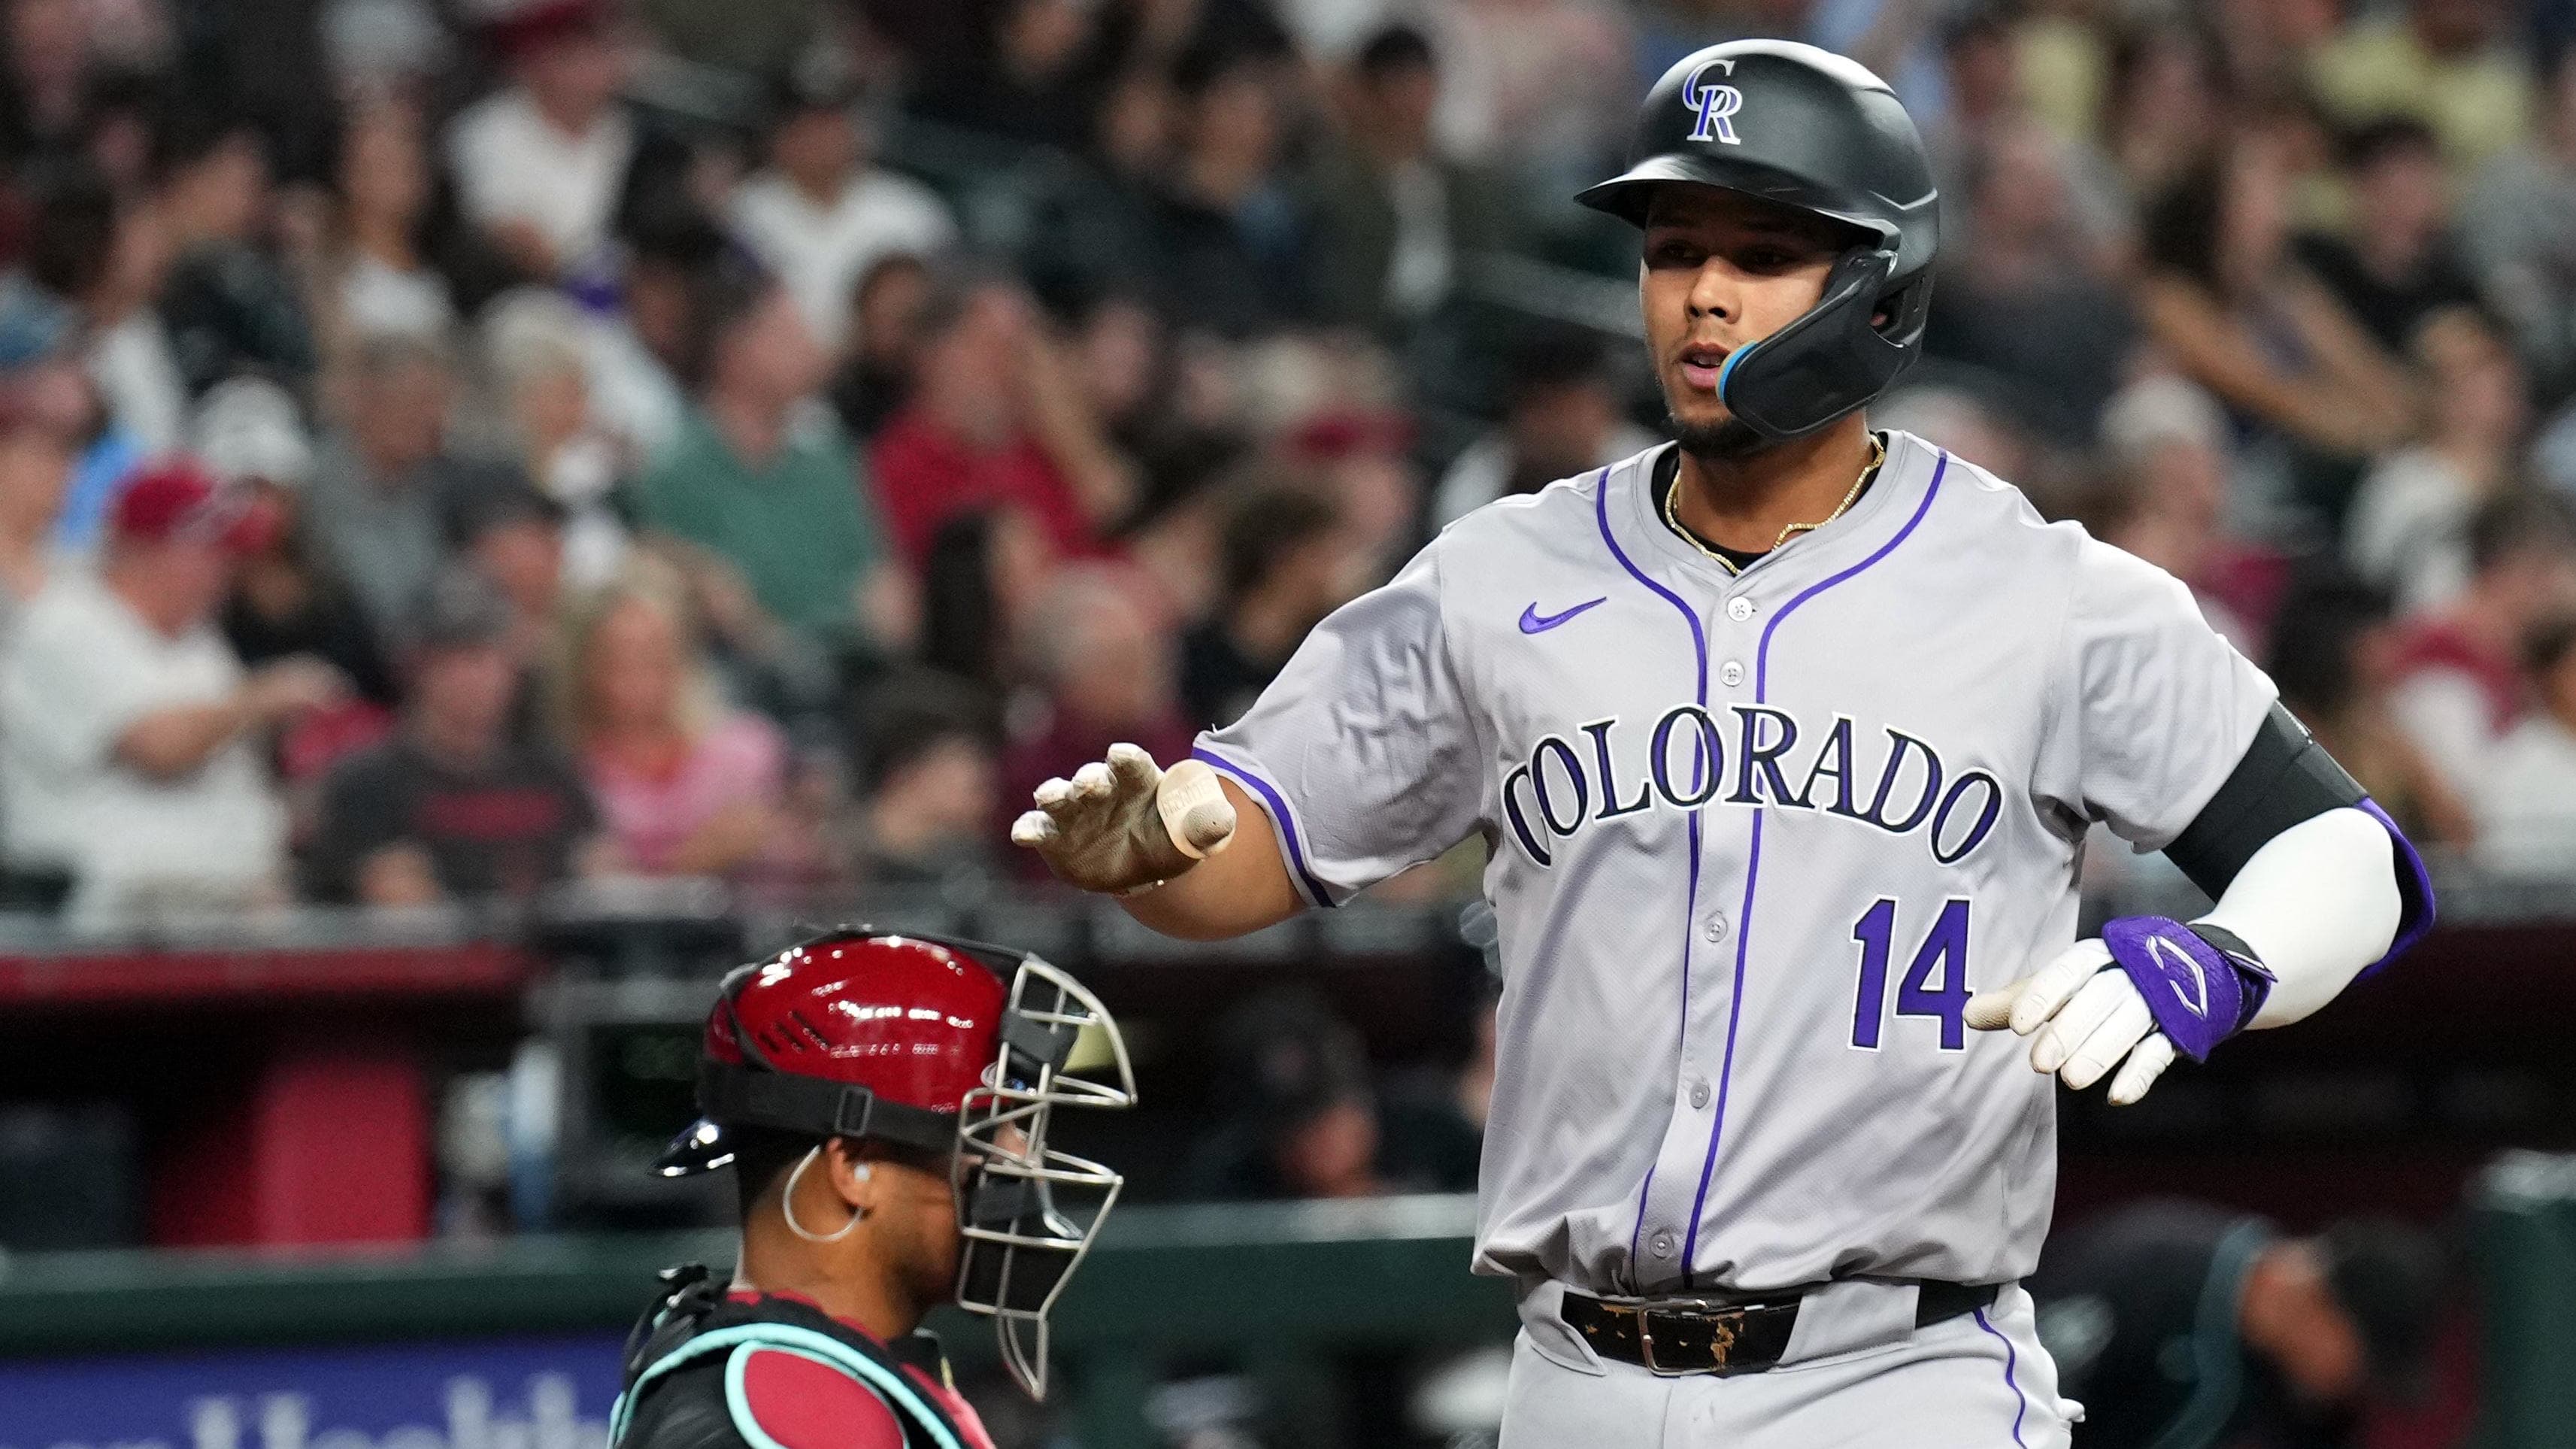 Colorado Rockies shortstop Ezequiel Tovar (14) scores after hitting a two-run home run in the second inning.